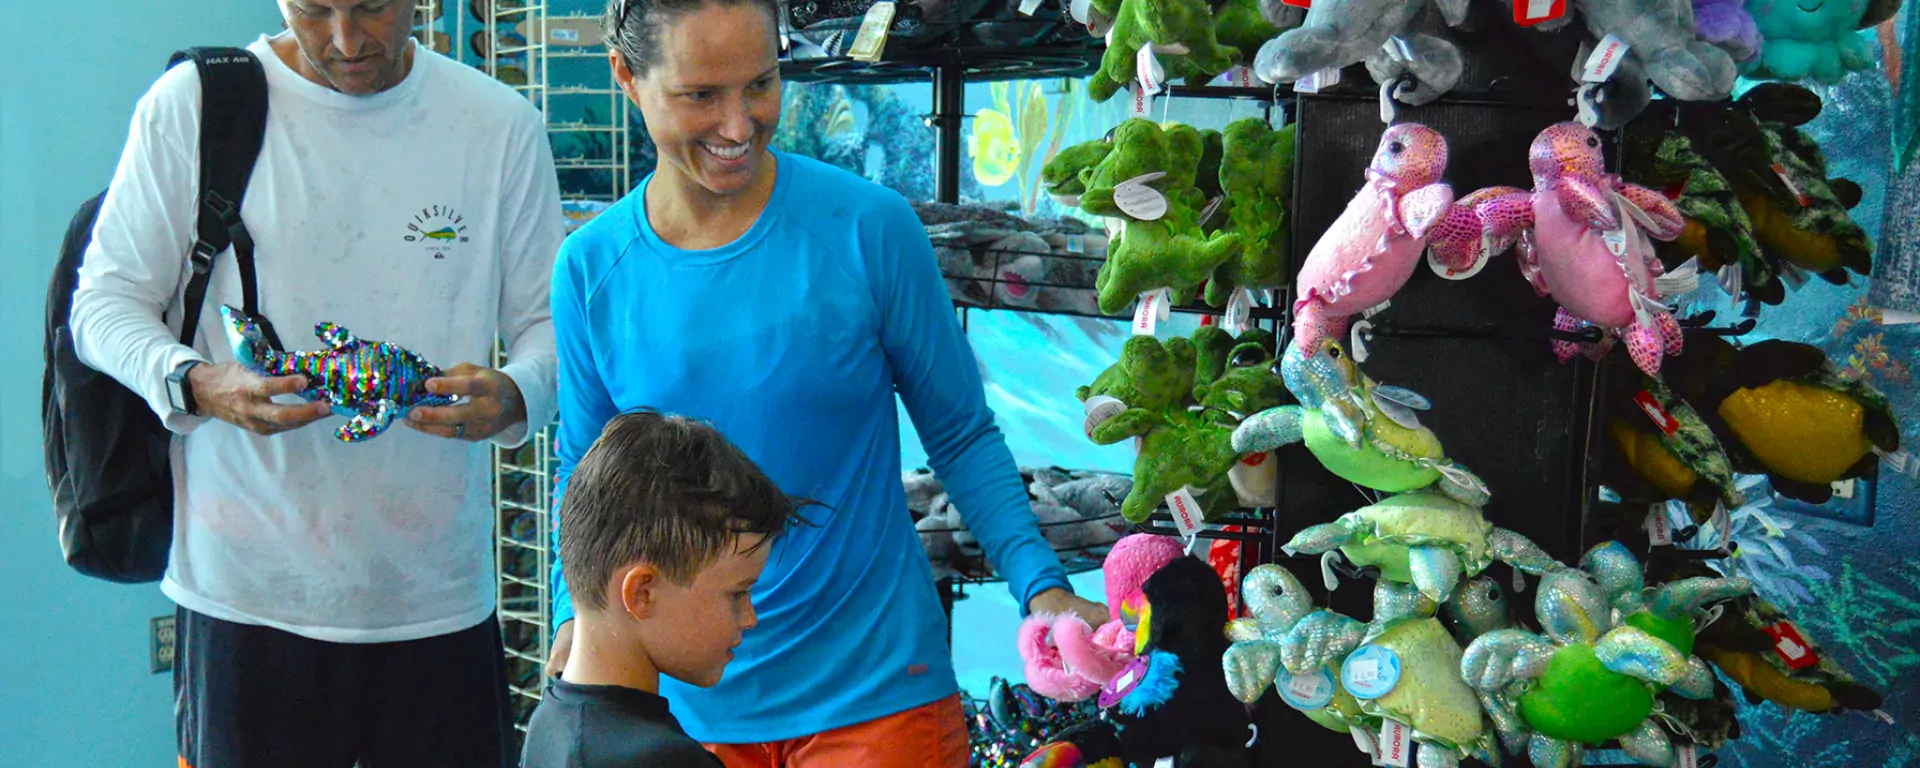 Image of a family looking at merchandise for sale at the gift shop at Sailfish Splash Waterpark in Stuart, FL.